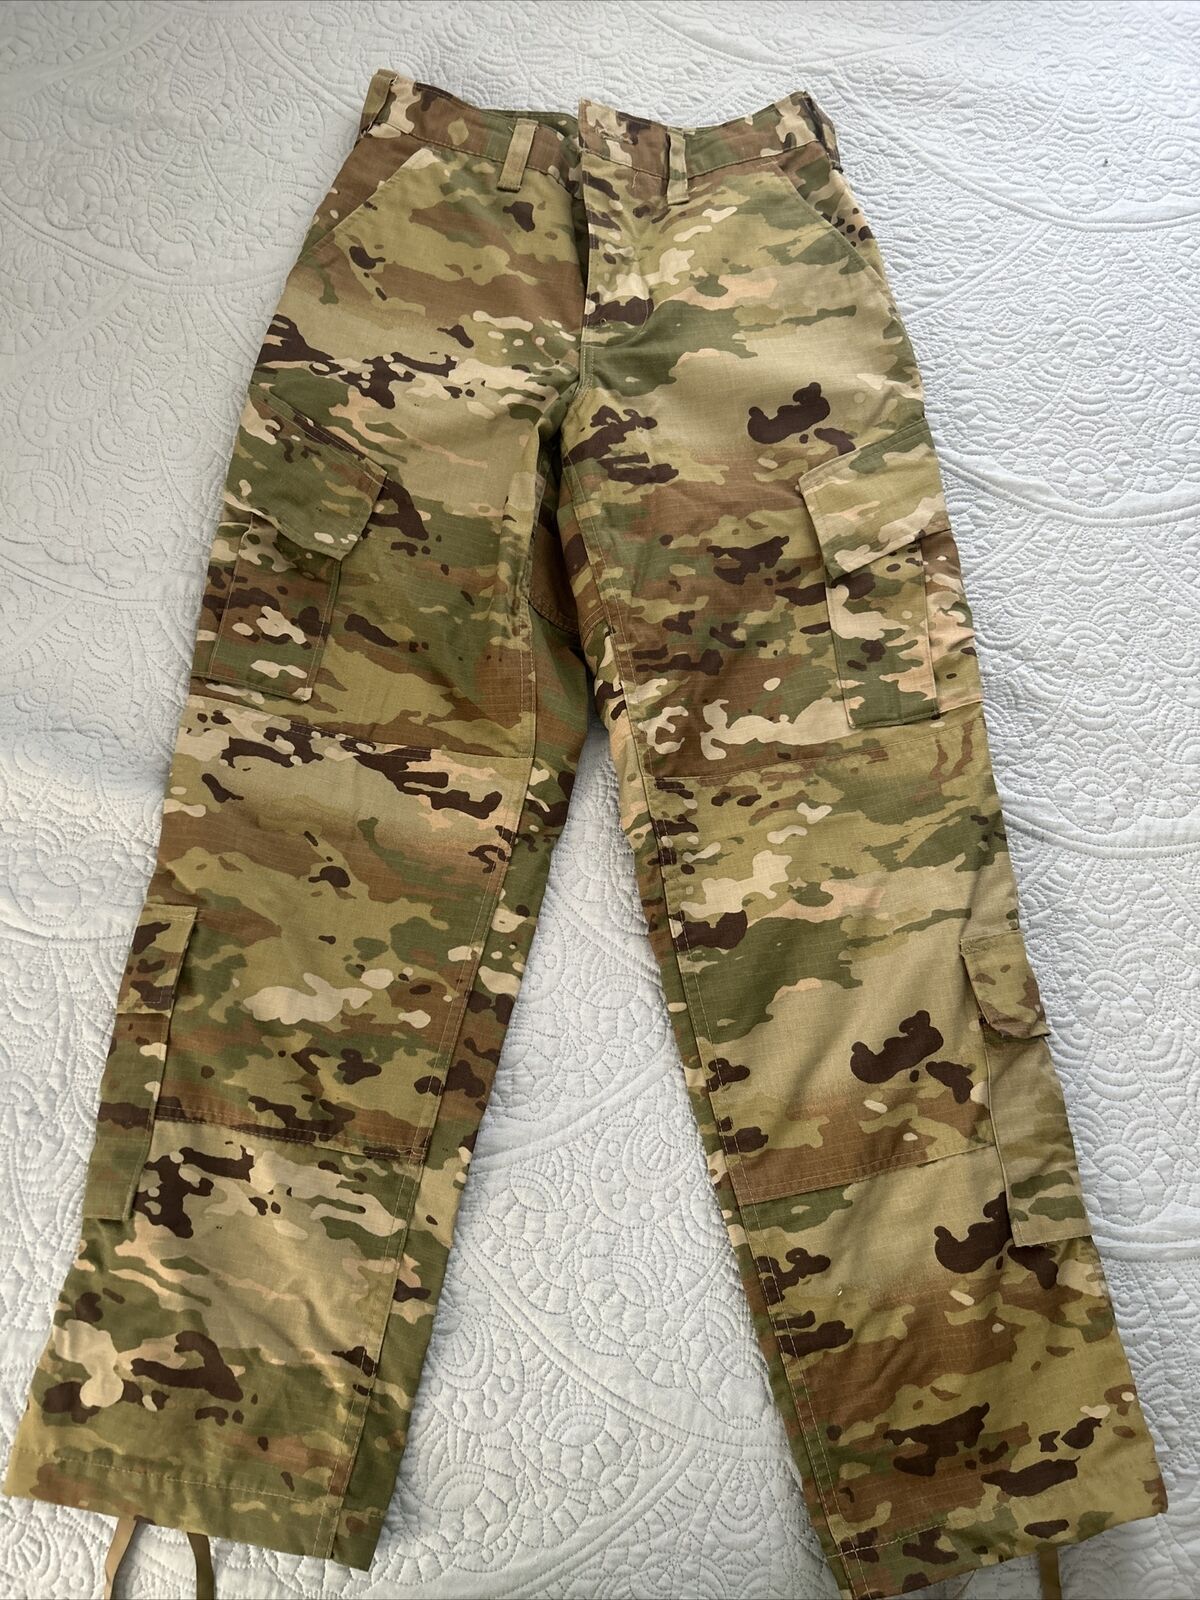 Official Air Force Camouflage Cargo Pants. 30S